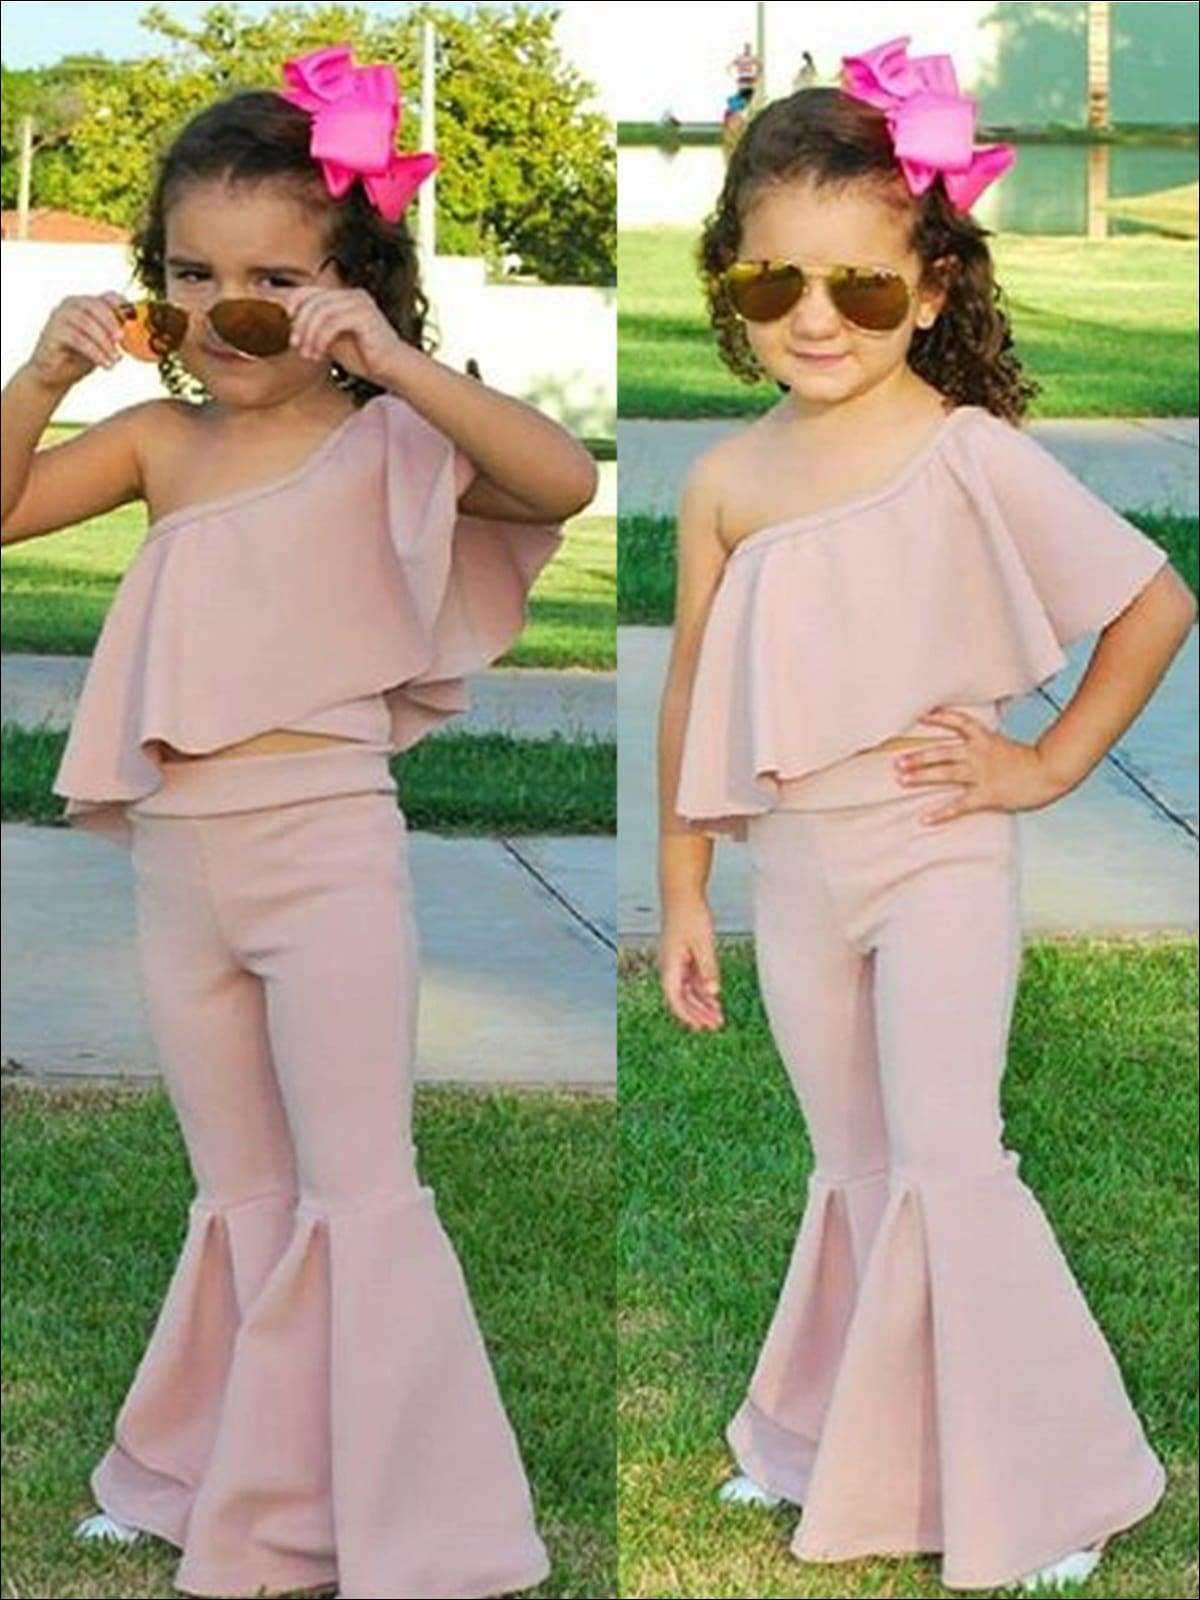 Girls Pink One Shoulder Ruffled Top And Bell Bottom Pants Set – Mia Belle  Girls